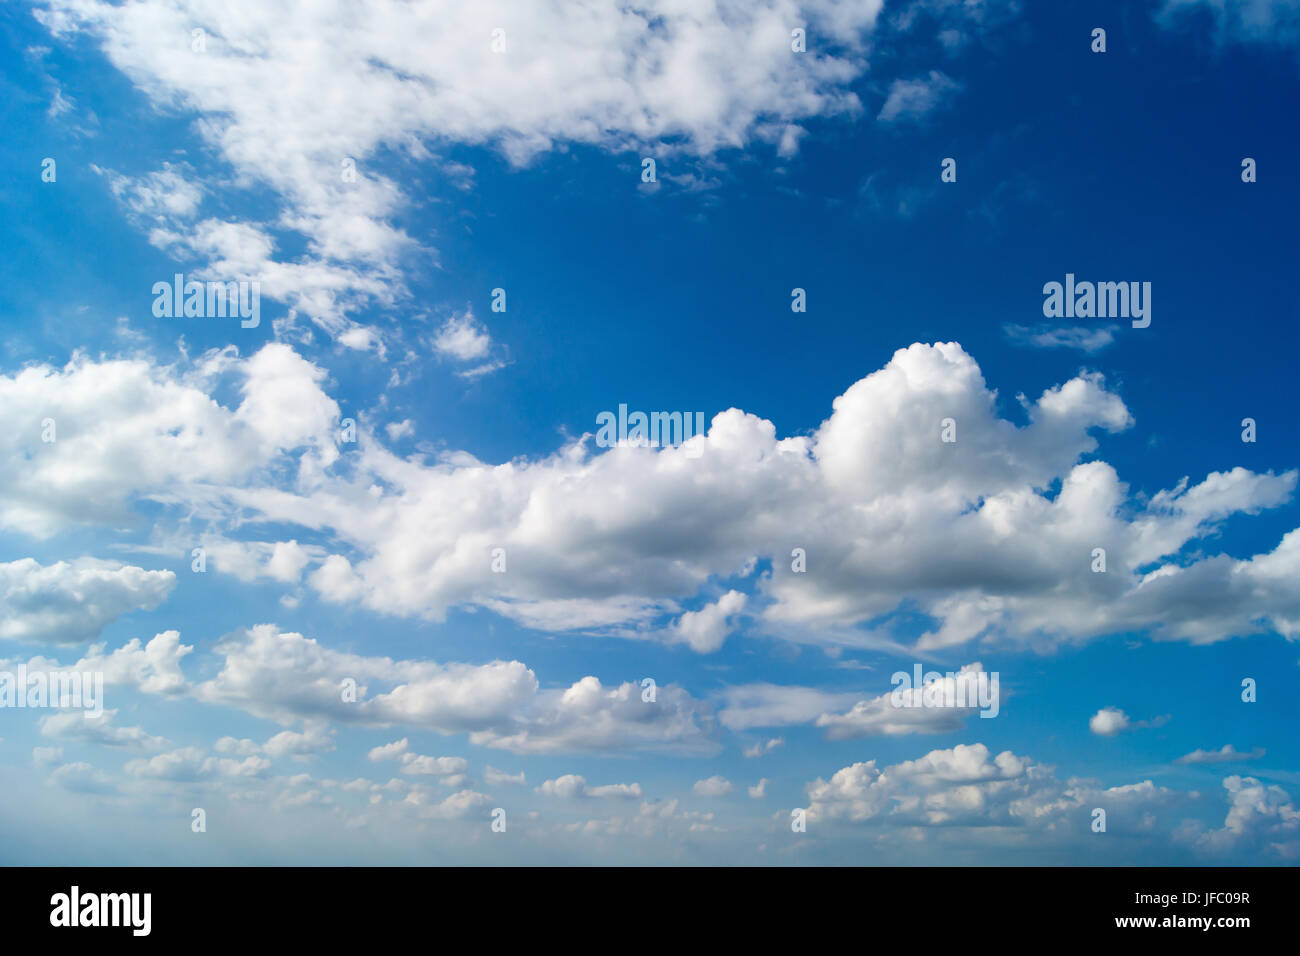 The sky is covered with white clouds. Stock Photo